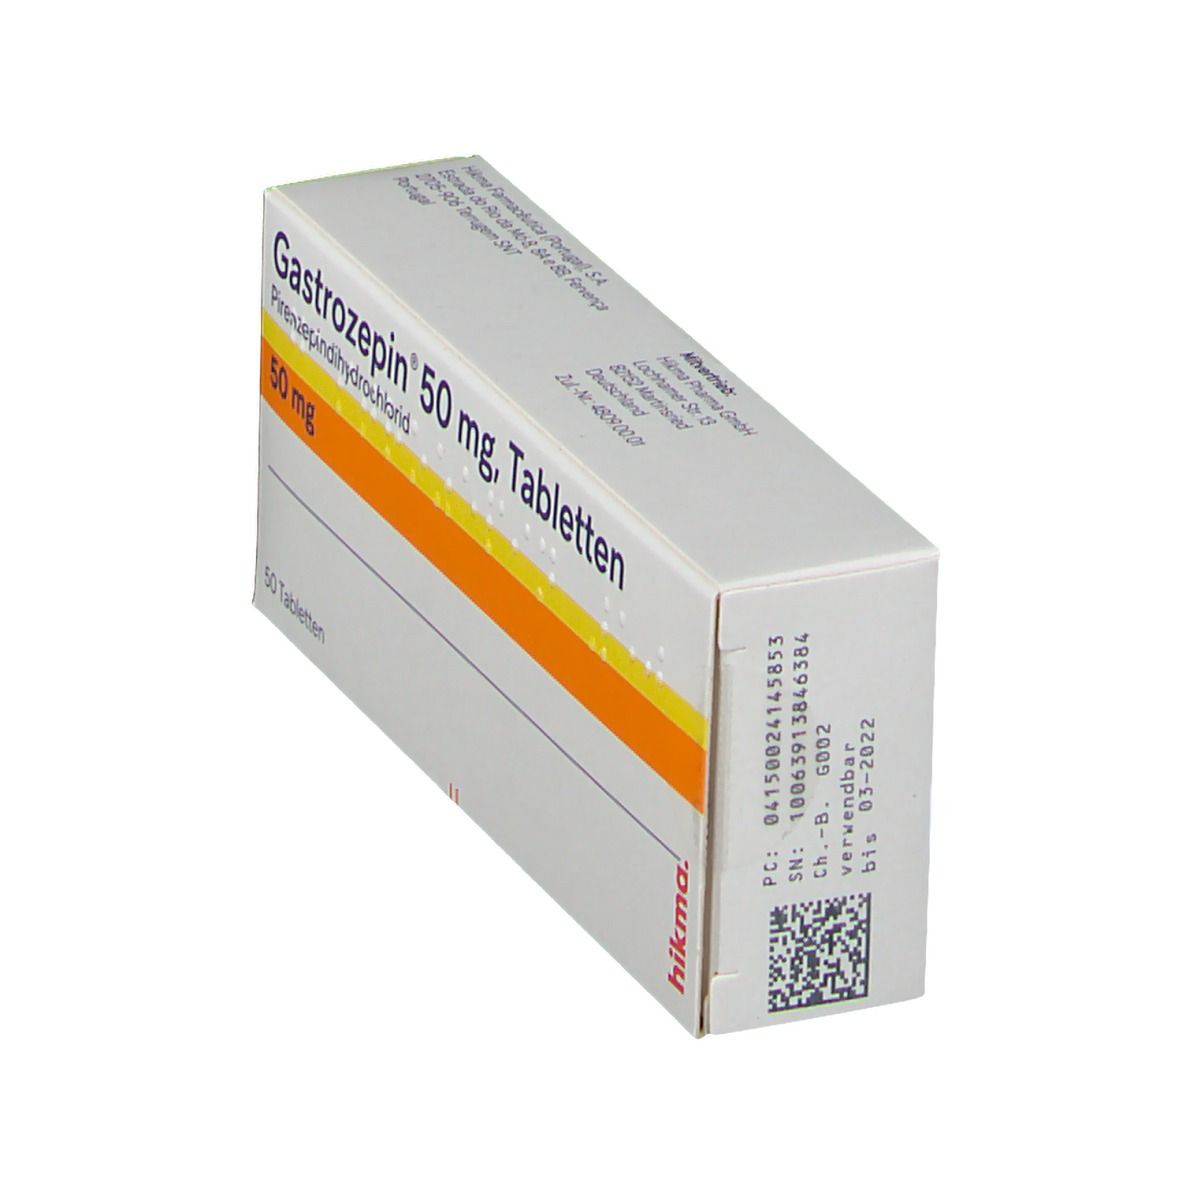 Gastrozepin® 50 mg